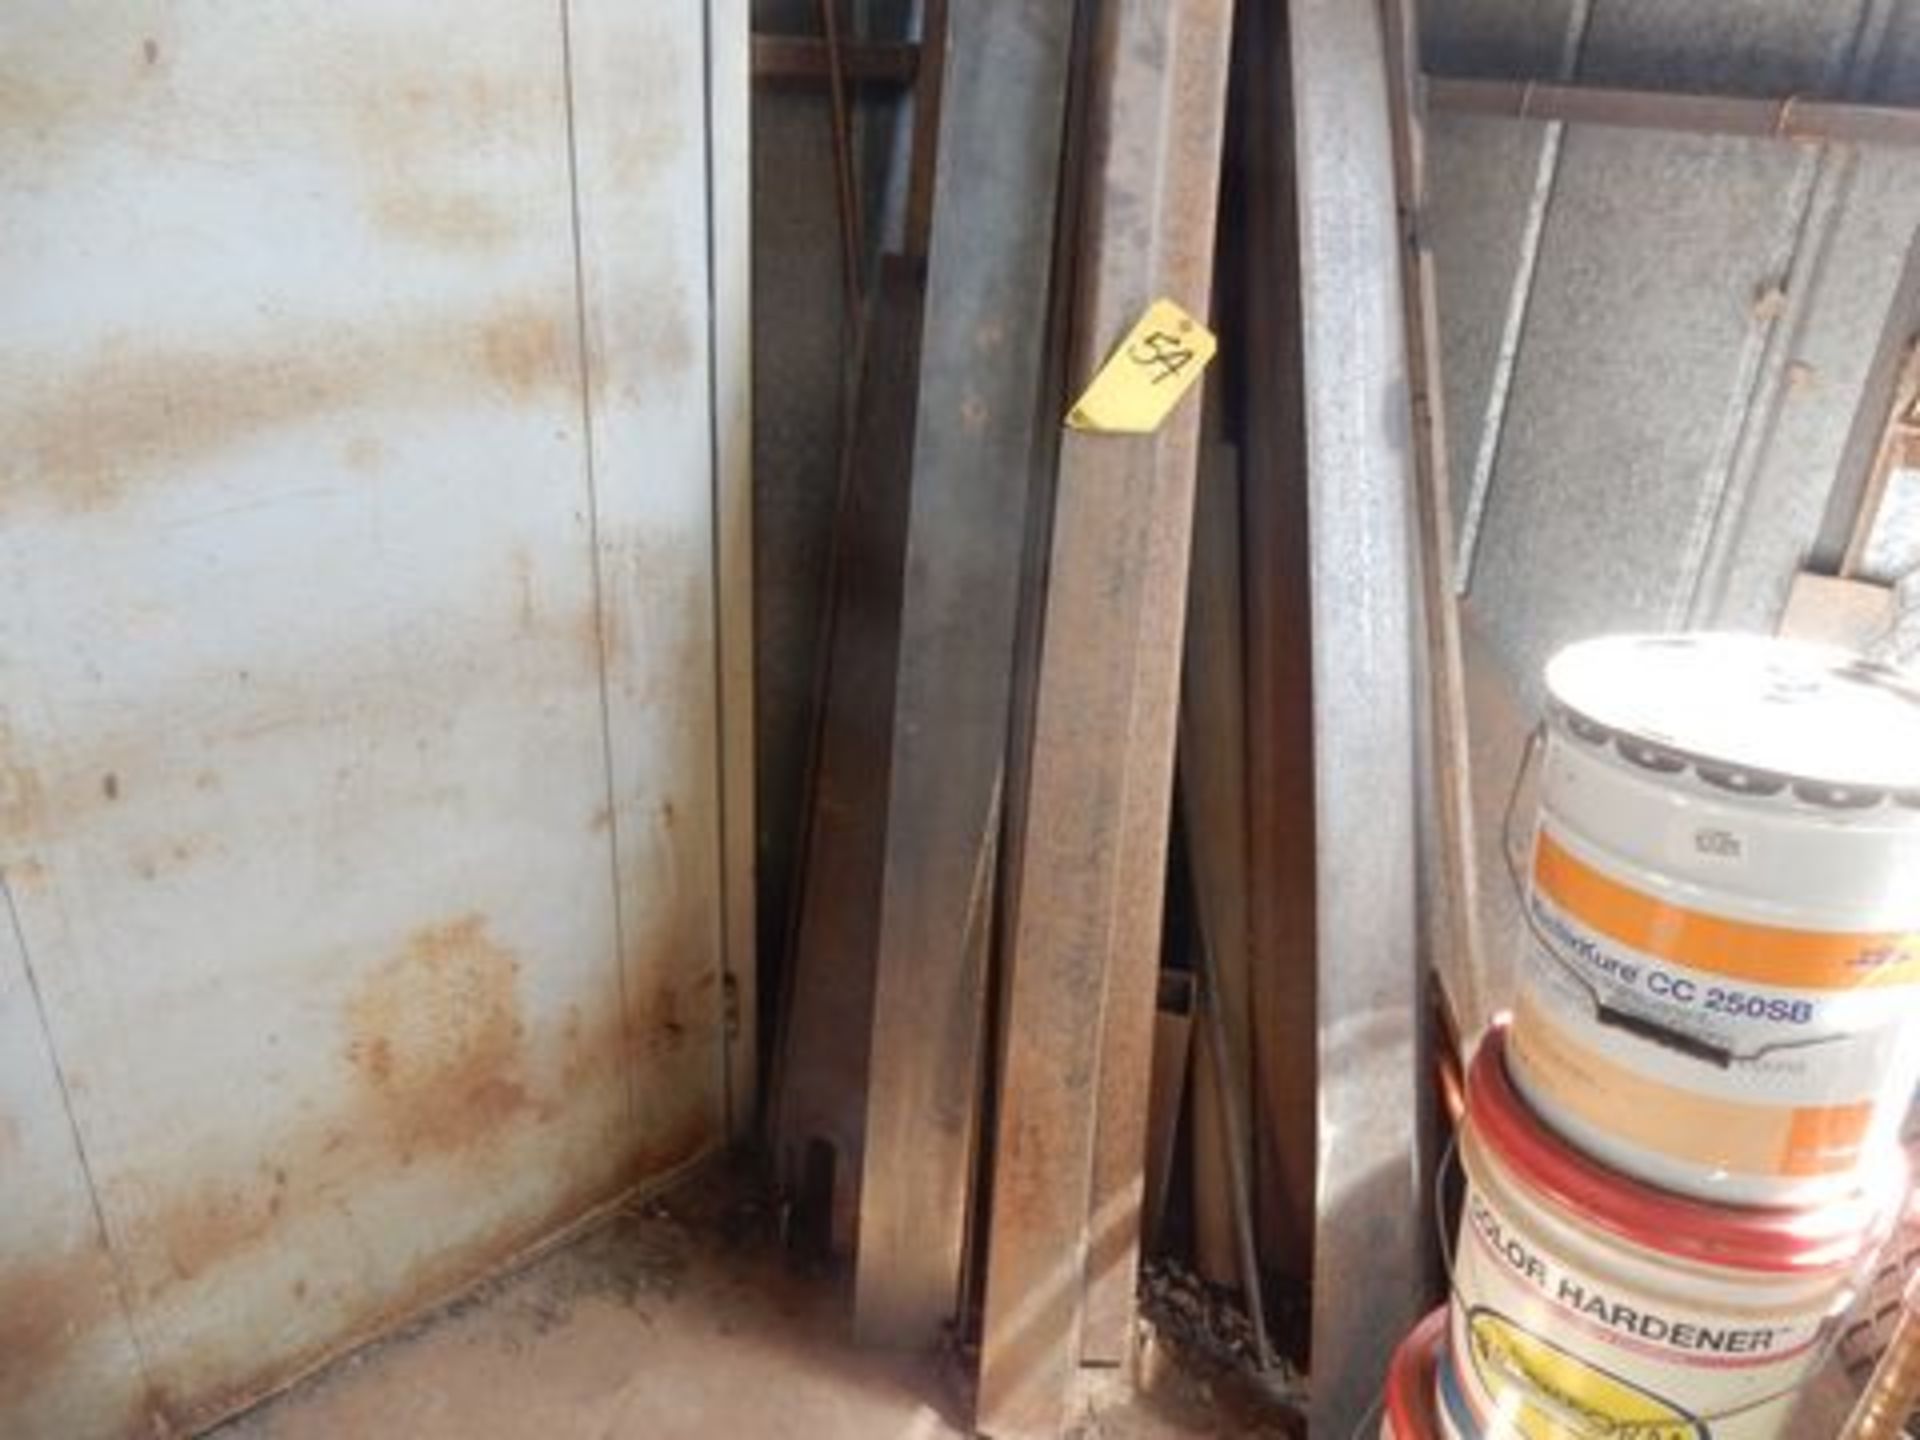 LOT ITEMS IN CORNER TO INCLUDE: MISC. STEEL TUBING, FLAT BAR, ETC. - Image 2 of 2